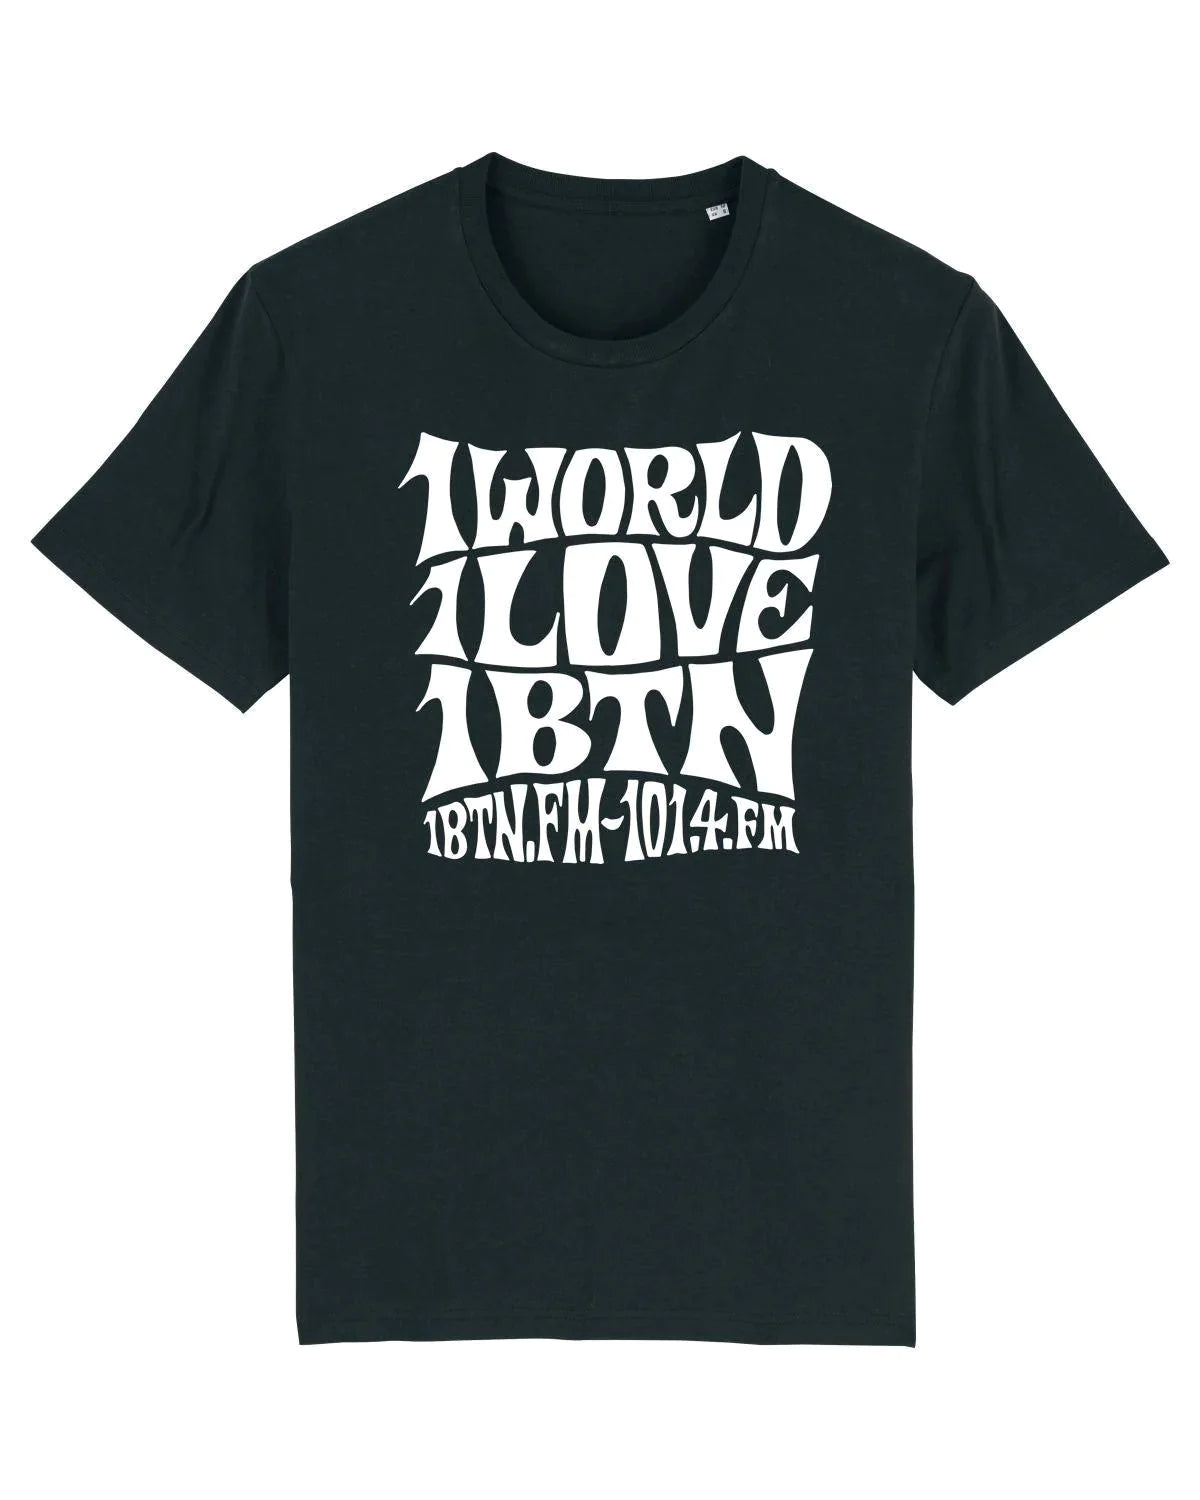 1 WORLD 1 LOVE by Swifty: T-Shirt Official Merchandise of 1BTN.FM (5 Colour Options) - SOUND IS COLOUR